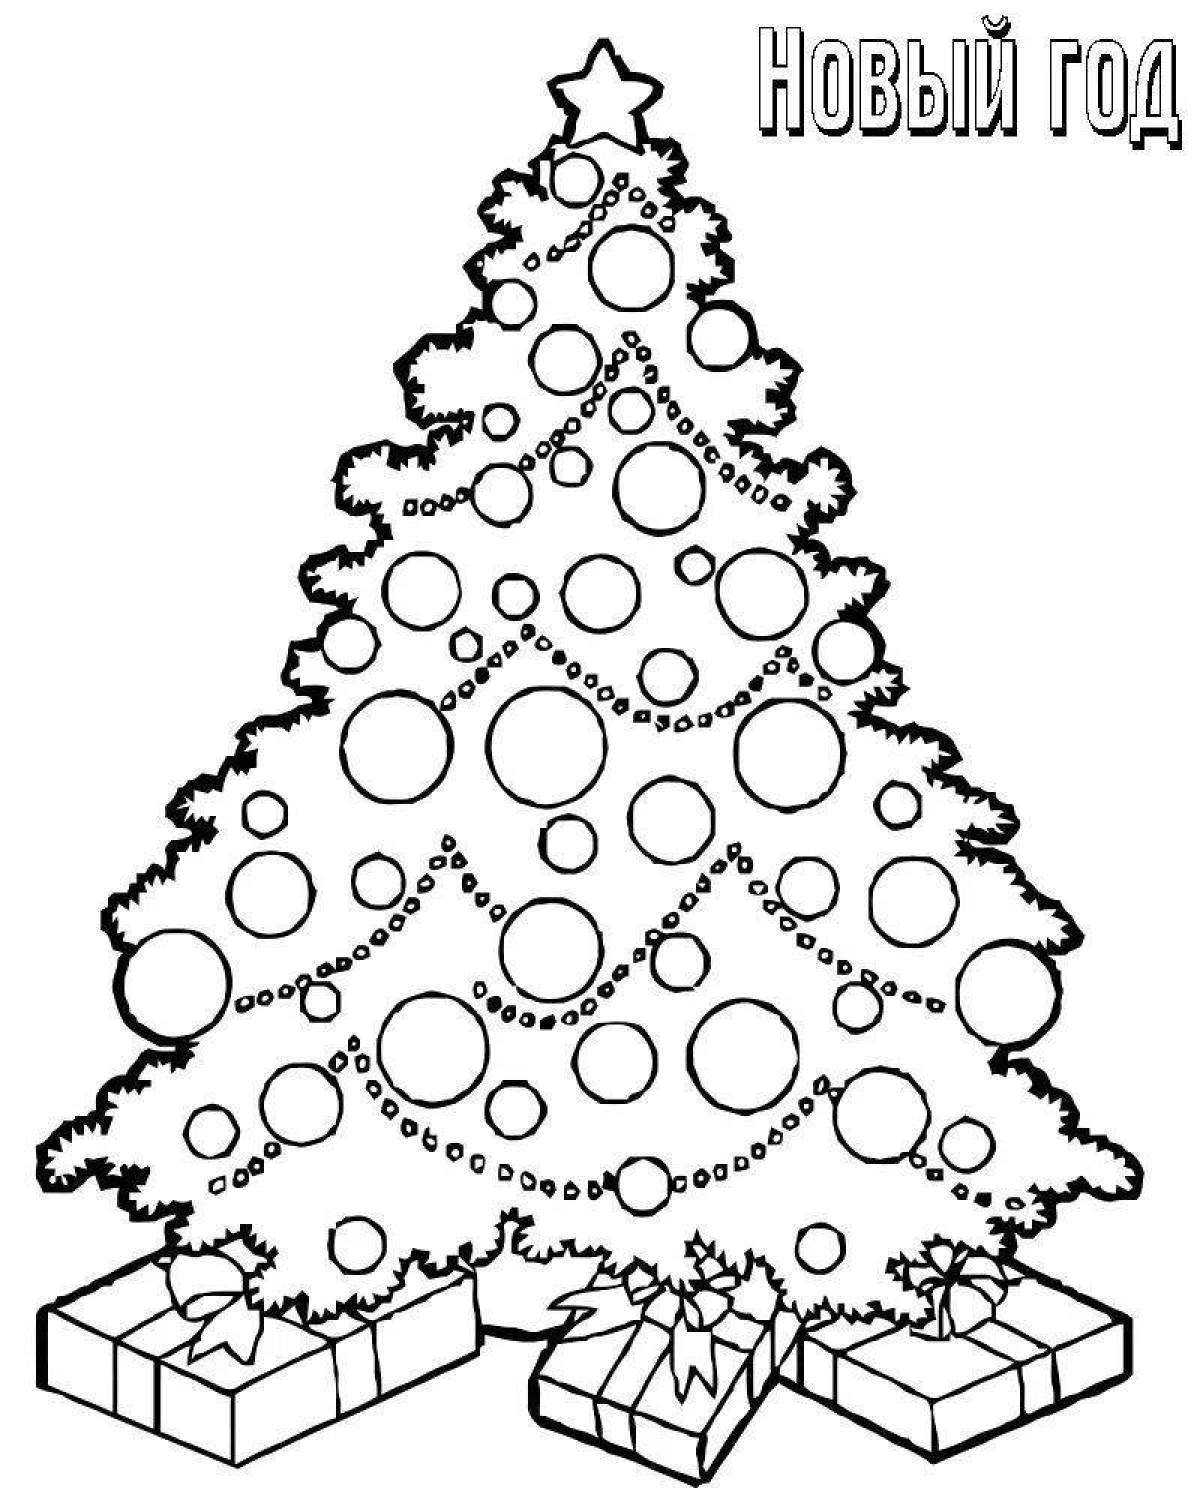 Exquisite Christmas tree with balls